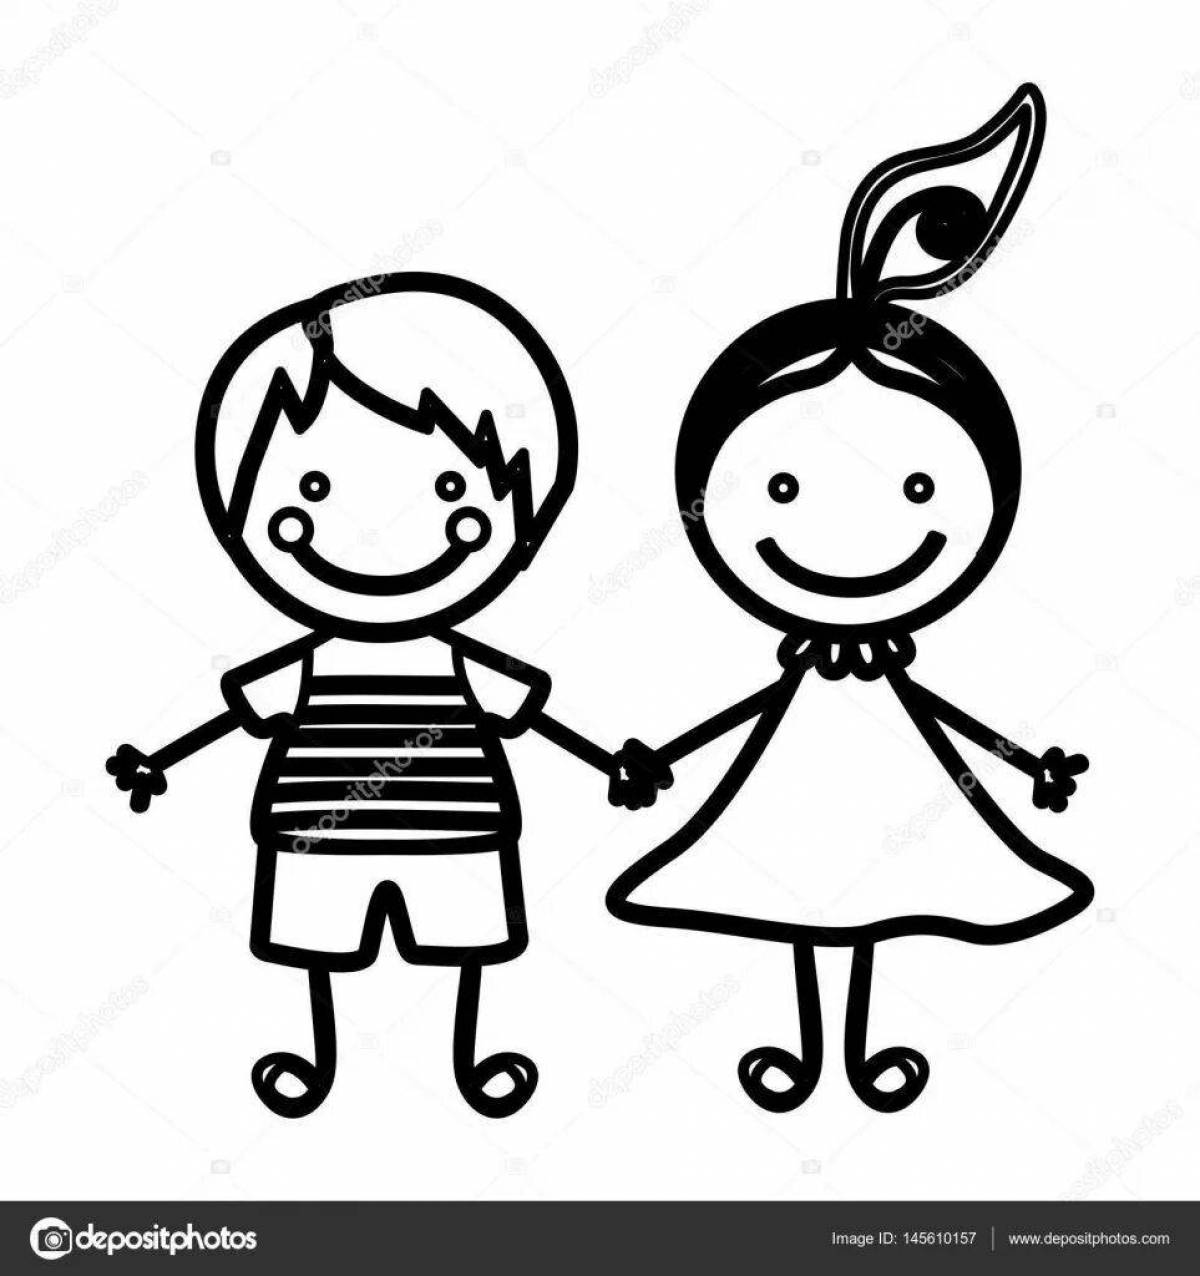 Coloring page boy and girl in love holding hands